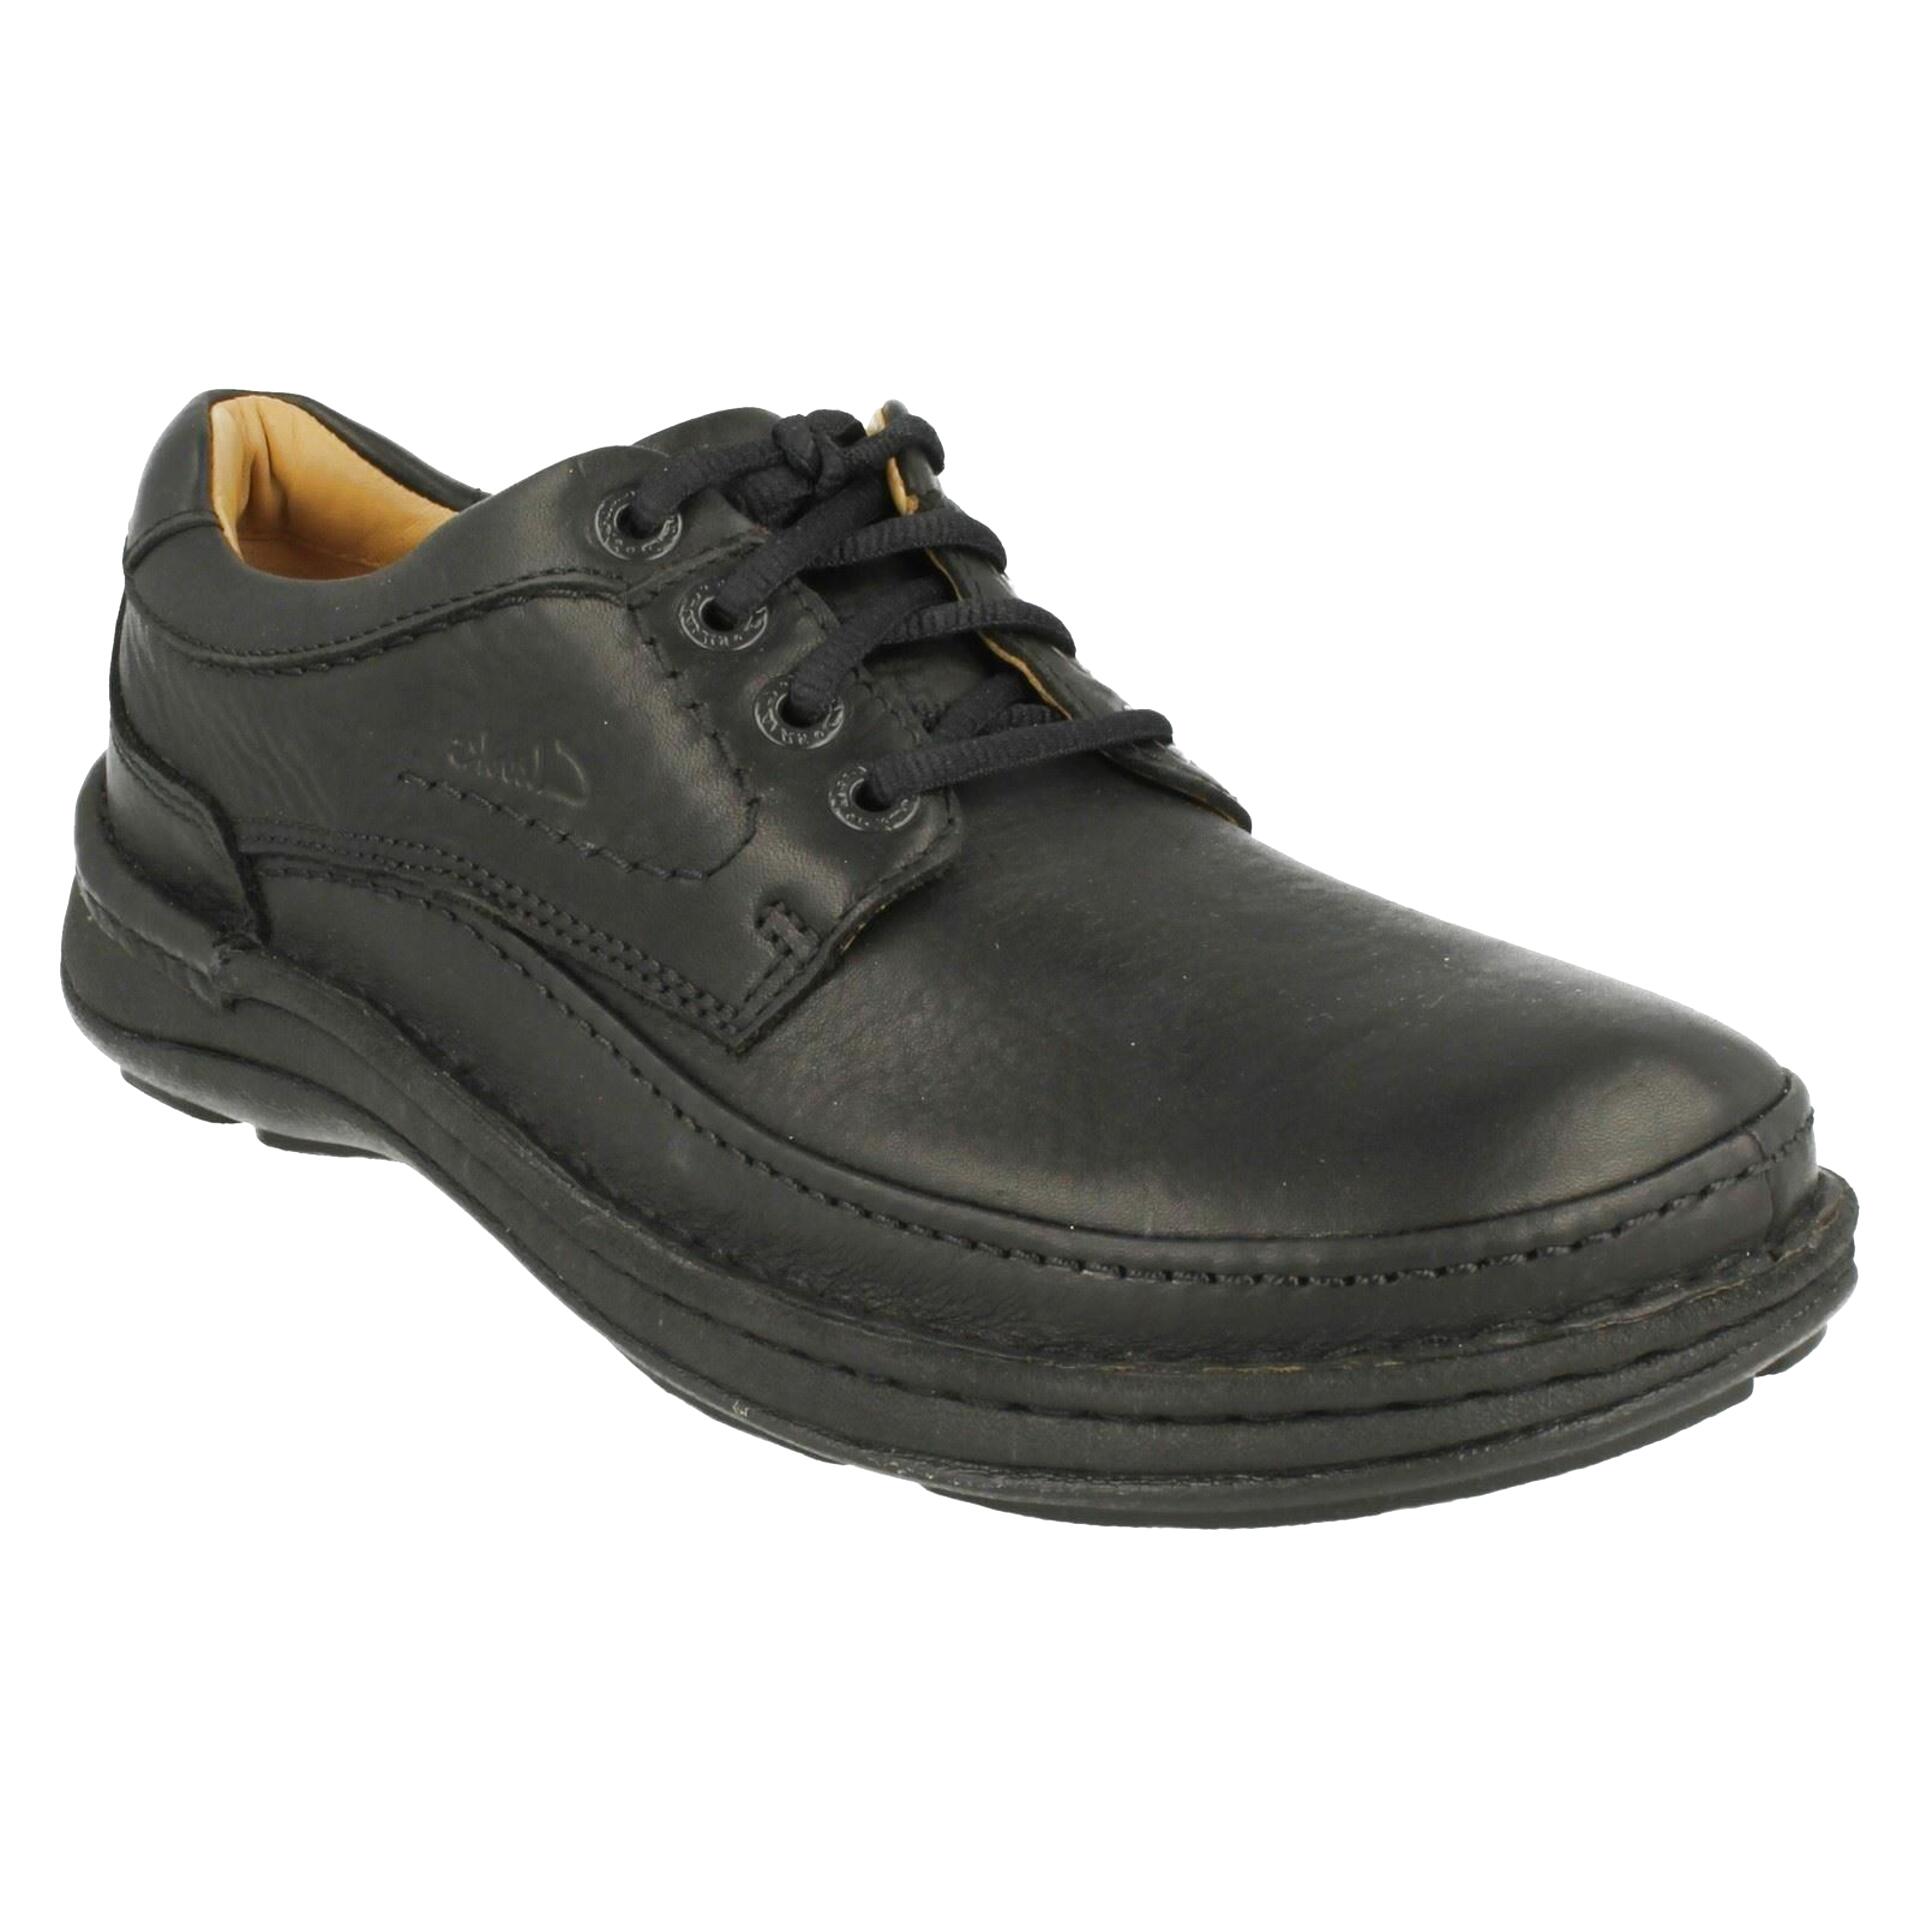 Clarks Active Air Shoe for sale in UK | View 74 bargains